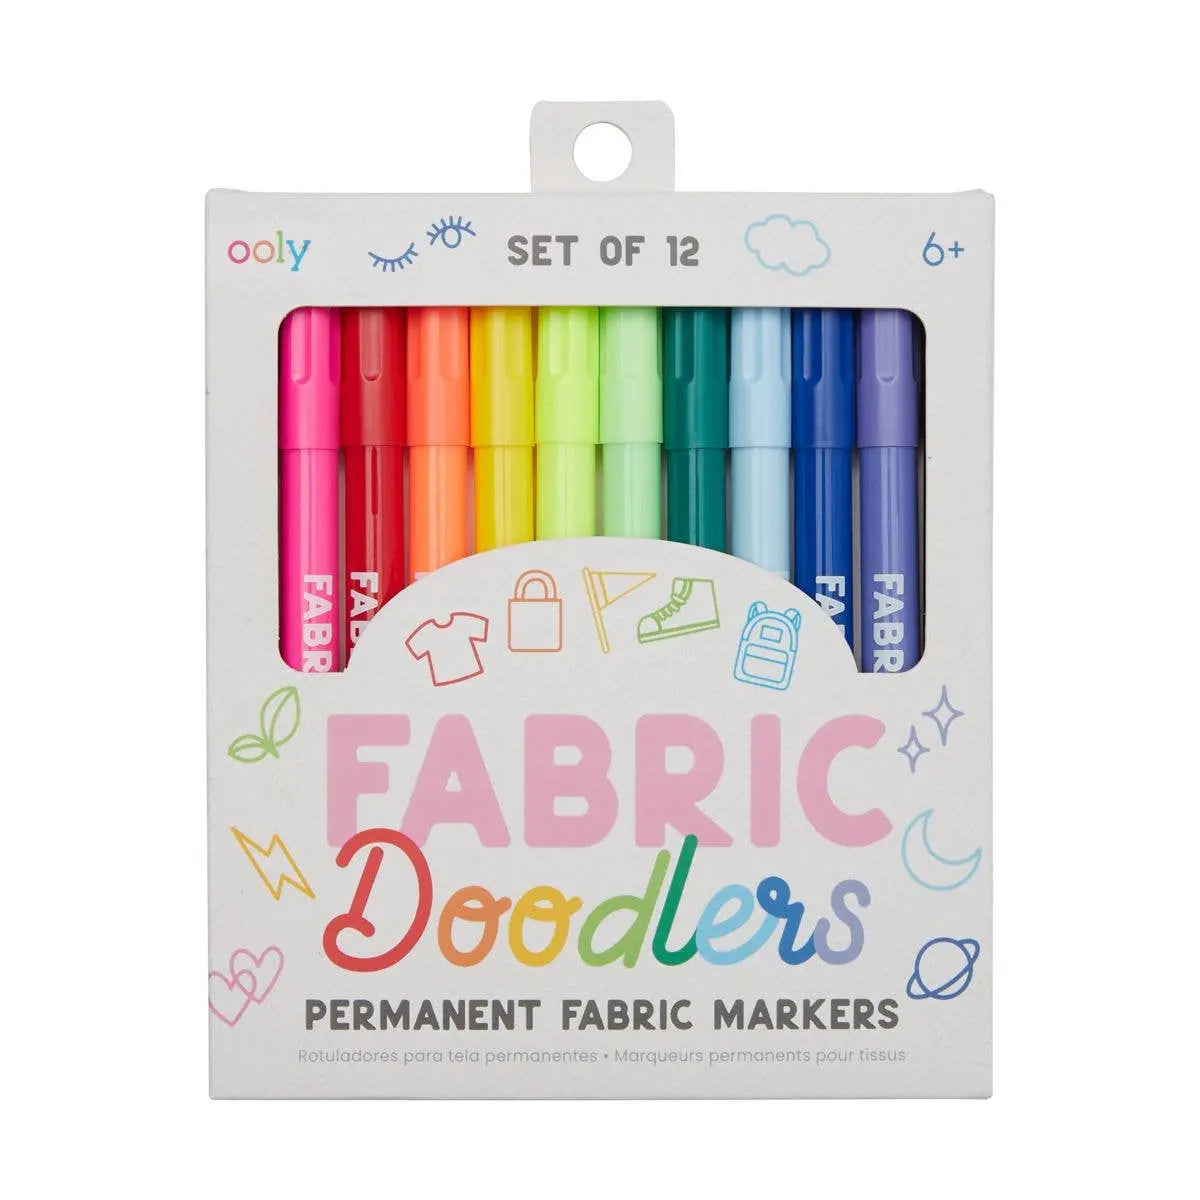 Fabric Doodlers Markers - Set of 12 OOLY